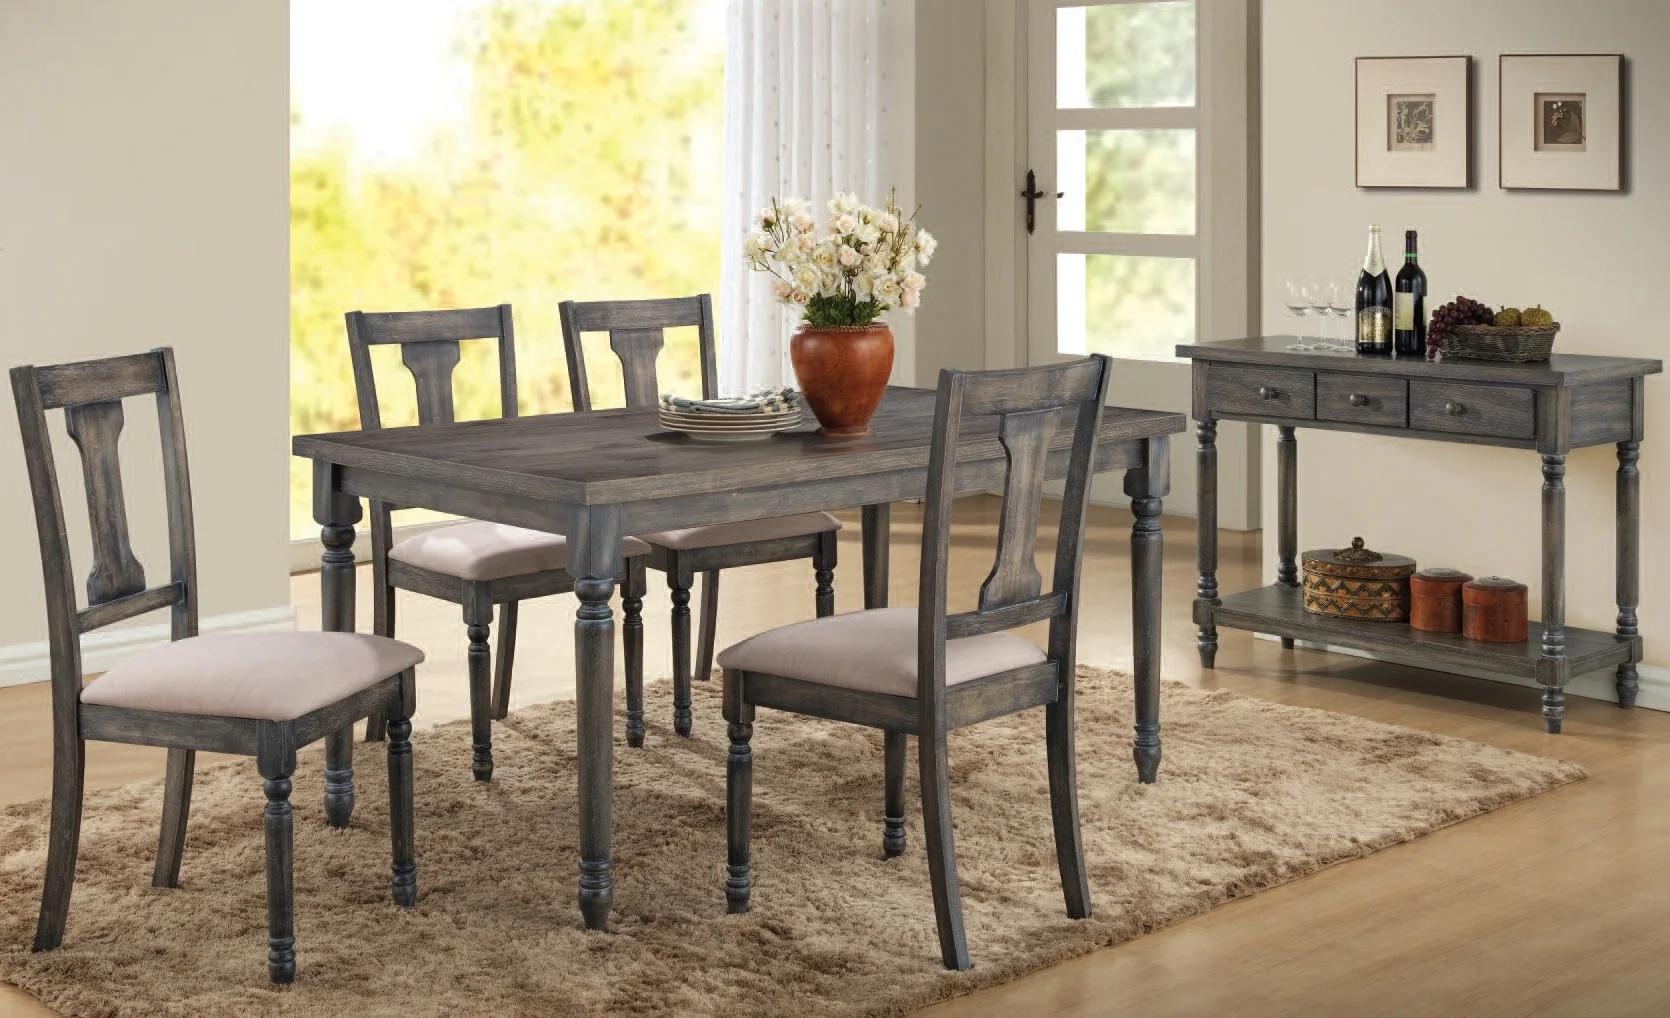 

    
Rustic Weathered Gray Dining Table + 4x Chairs by Acme Wallace 71435-5pcs
